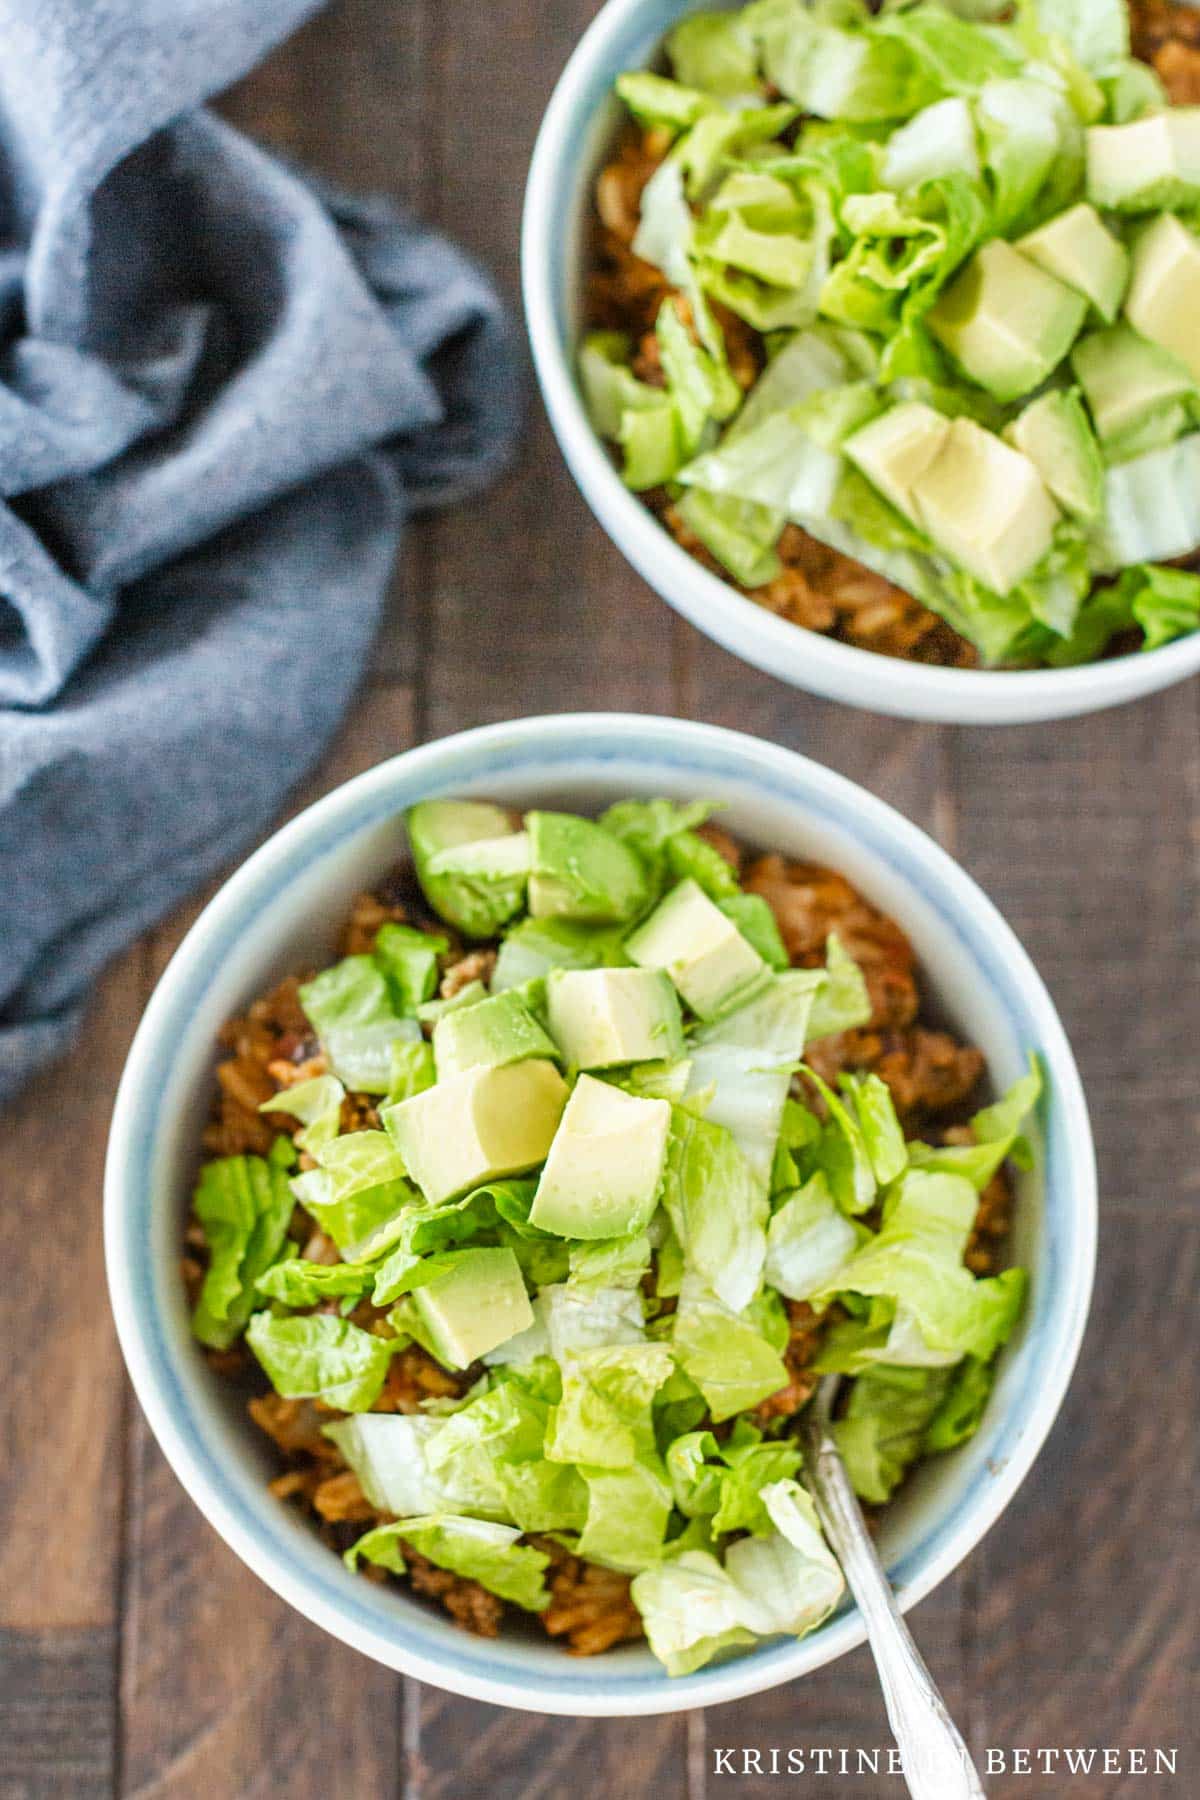 Beef burrito casserole in a white bowl, topped with chopped lettuce and avocado with a blue napkin sitting next to it.